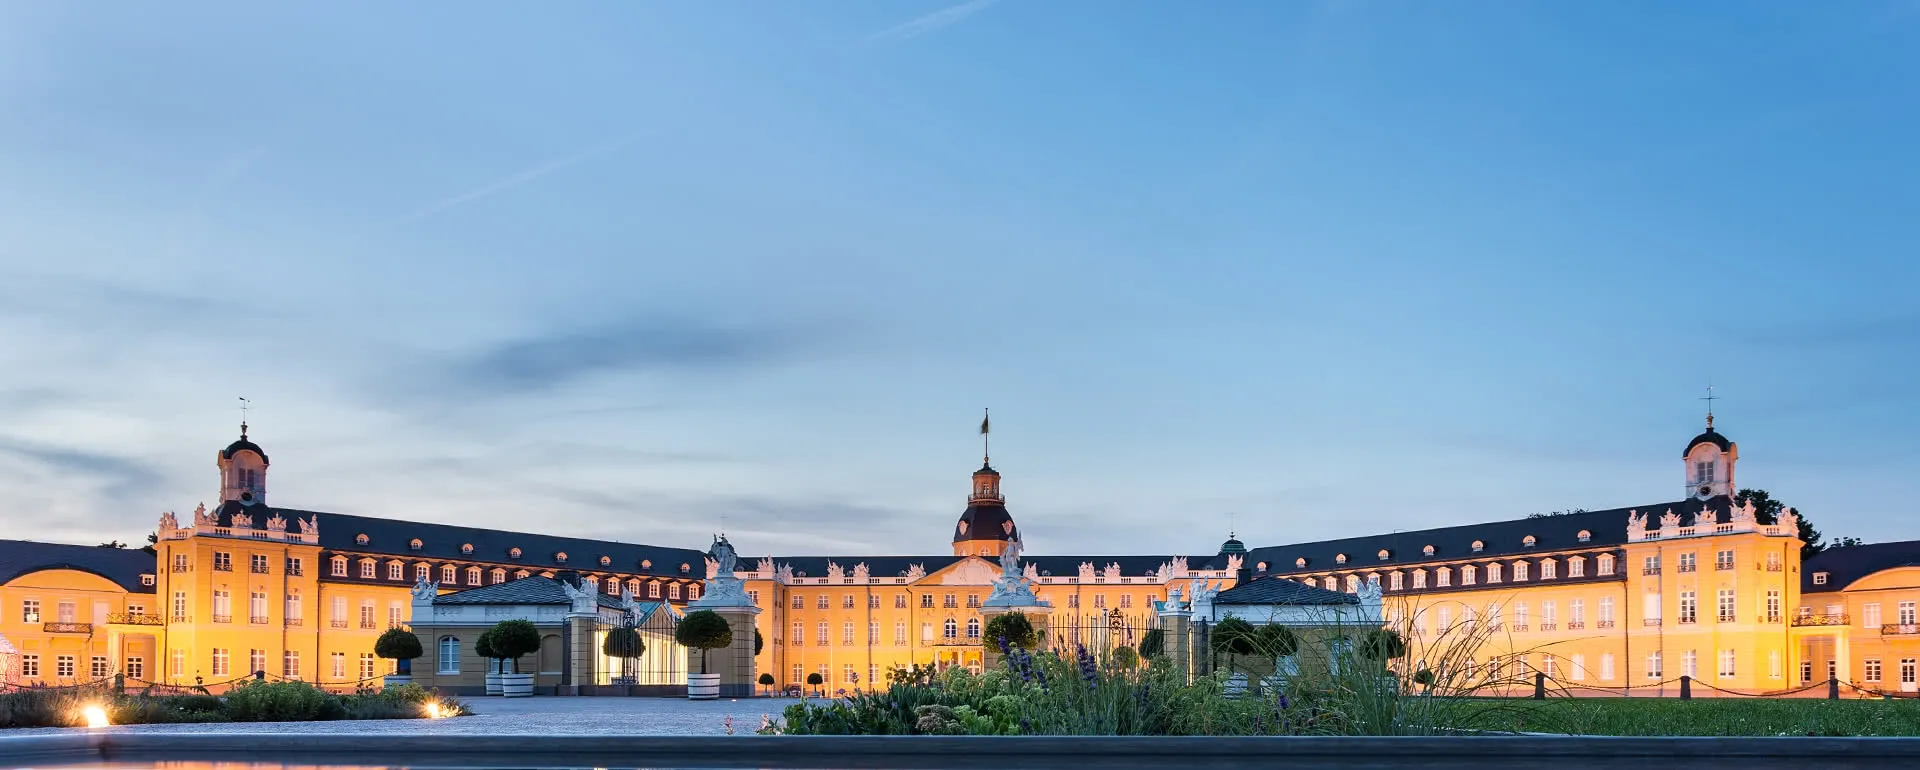 Karlsruhe - the destination with youth hostels